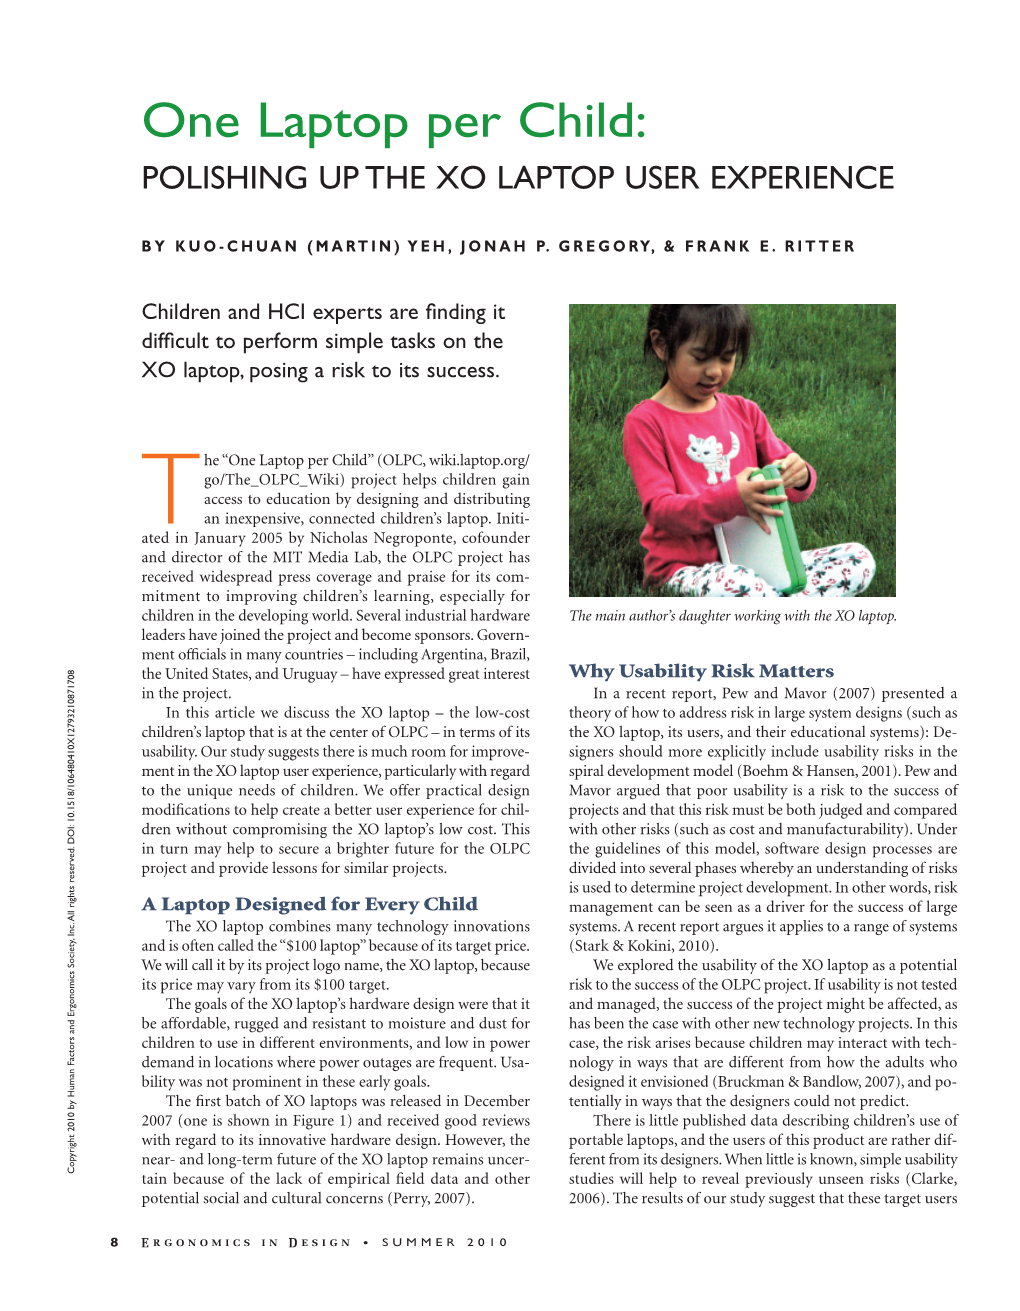 One Laptop Per Child: POLISHING up the XO LAPTOP USER EXPERIENCE